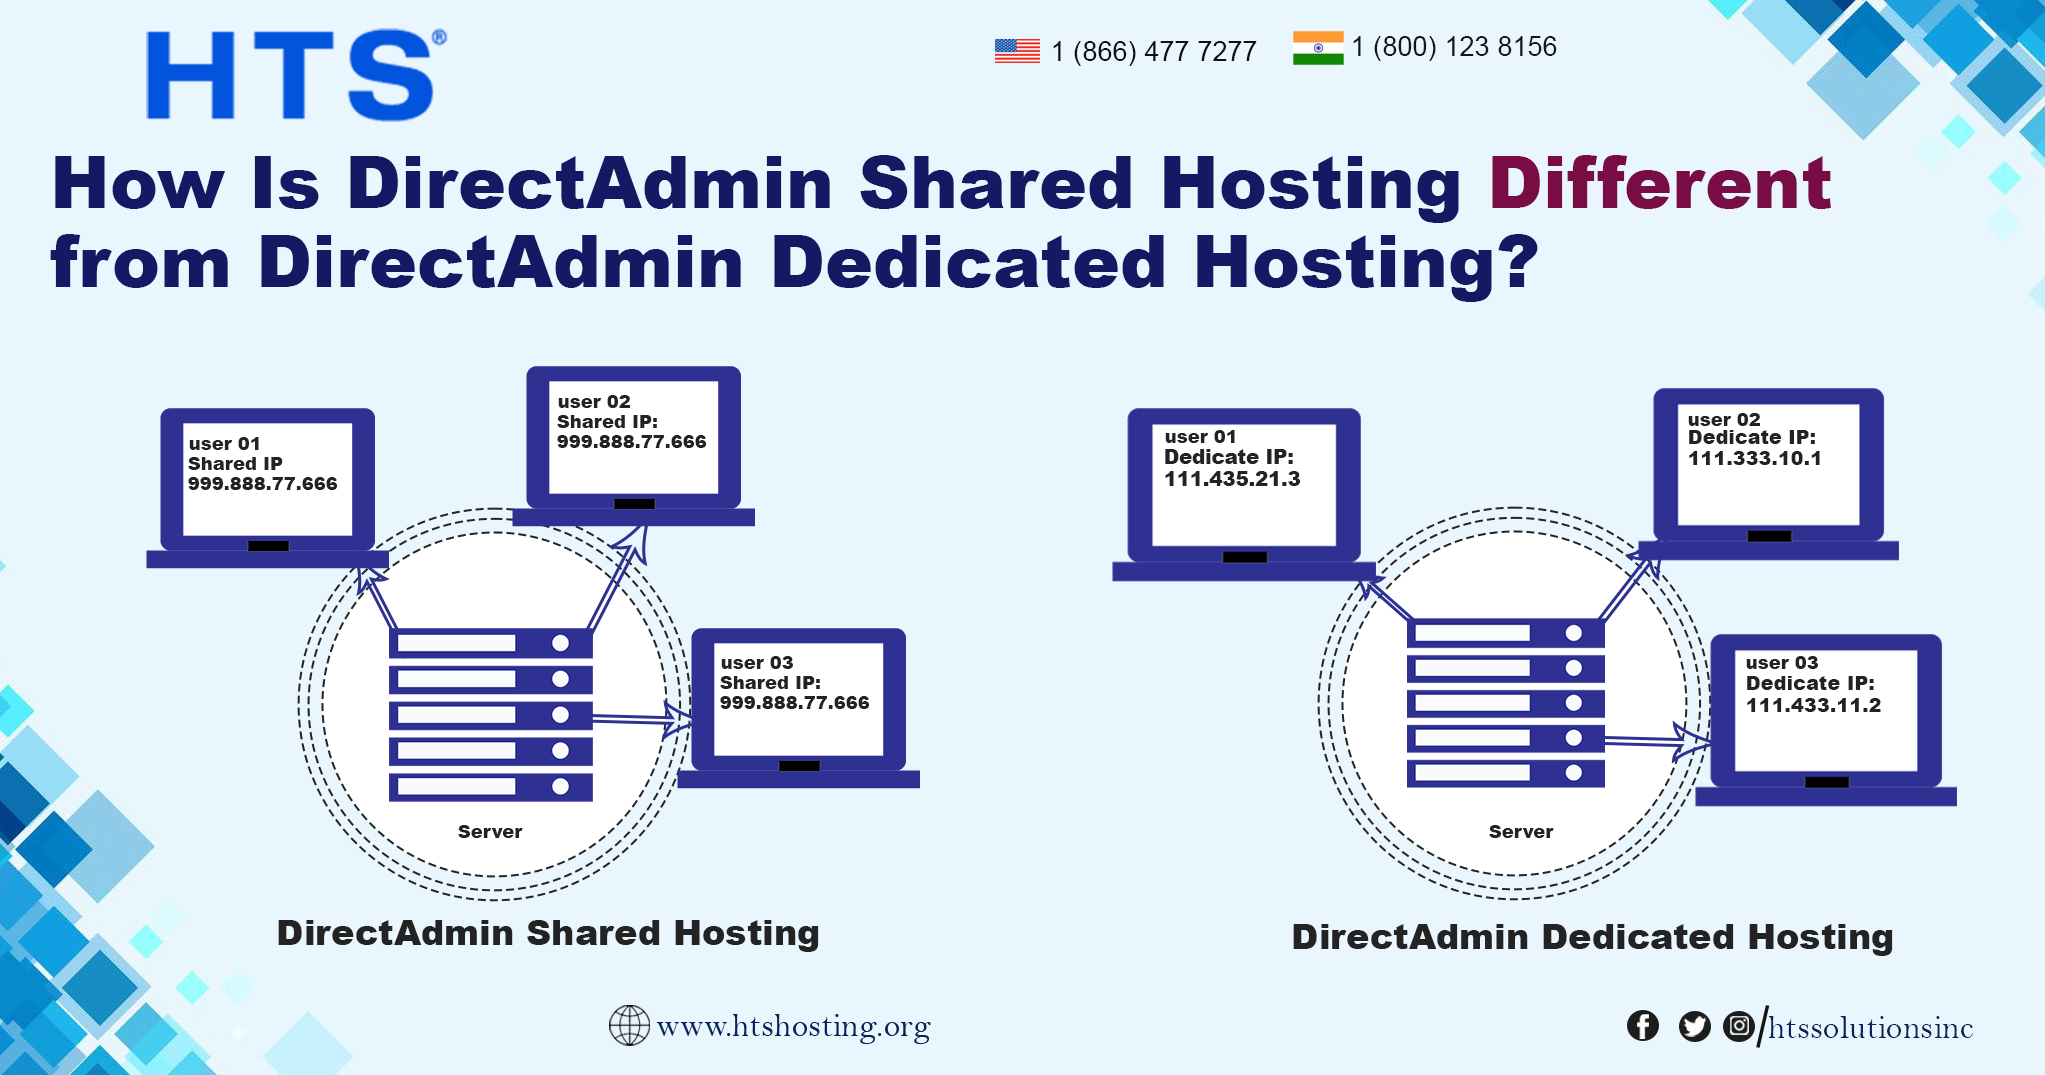 How Is DirectAdmin Shared Hosting Different from DirectAdmin Dedicated Hosting?